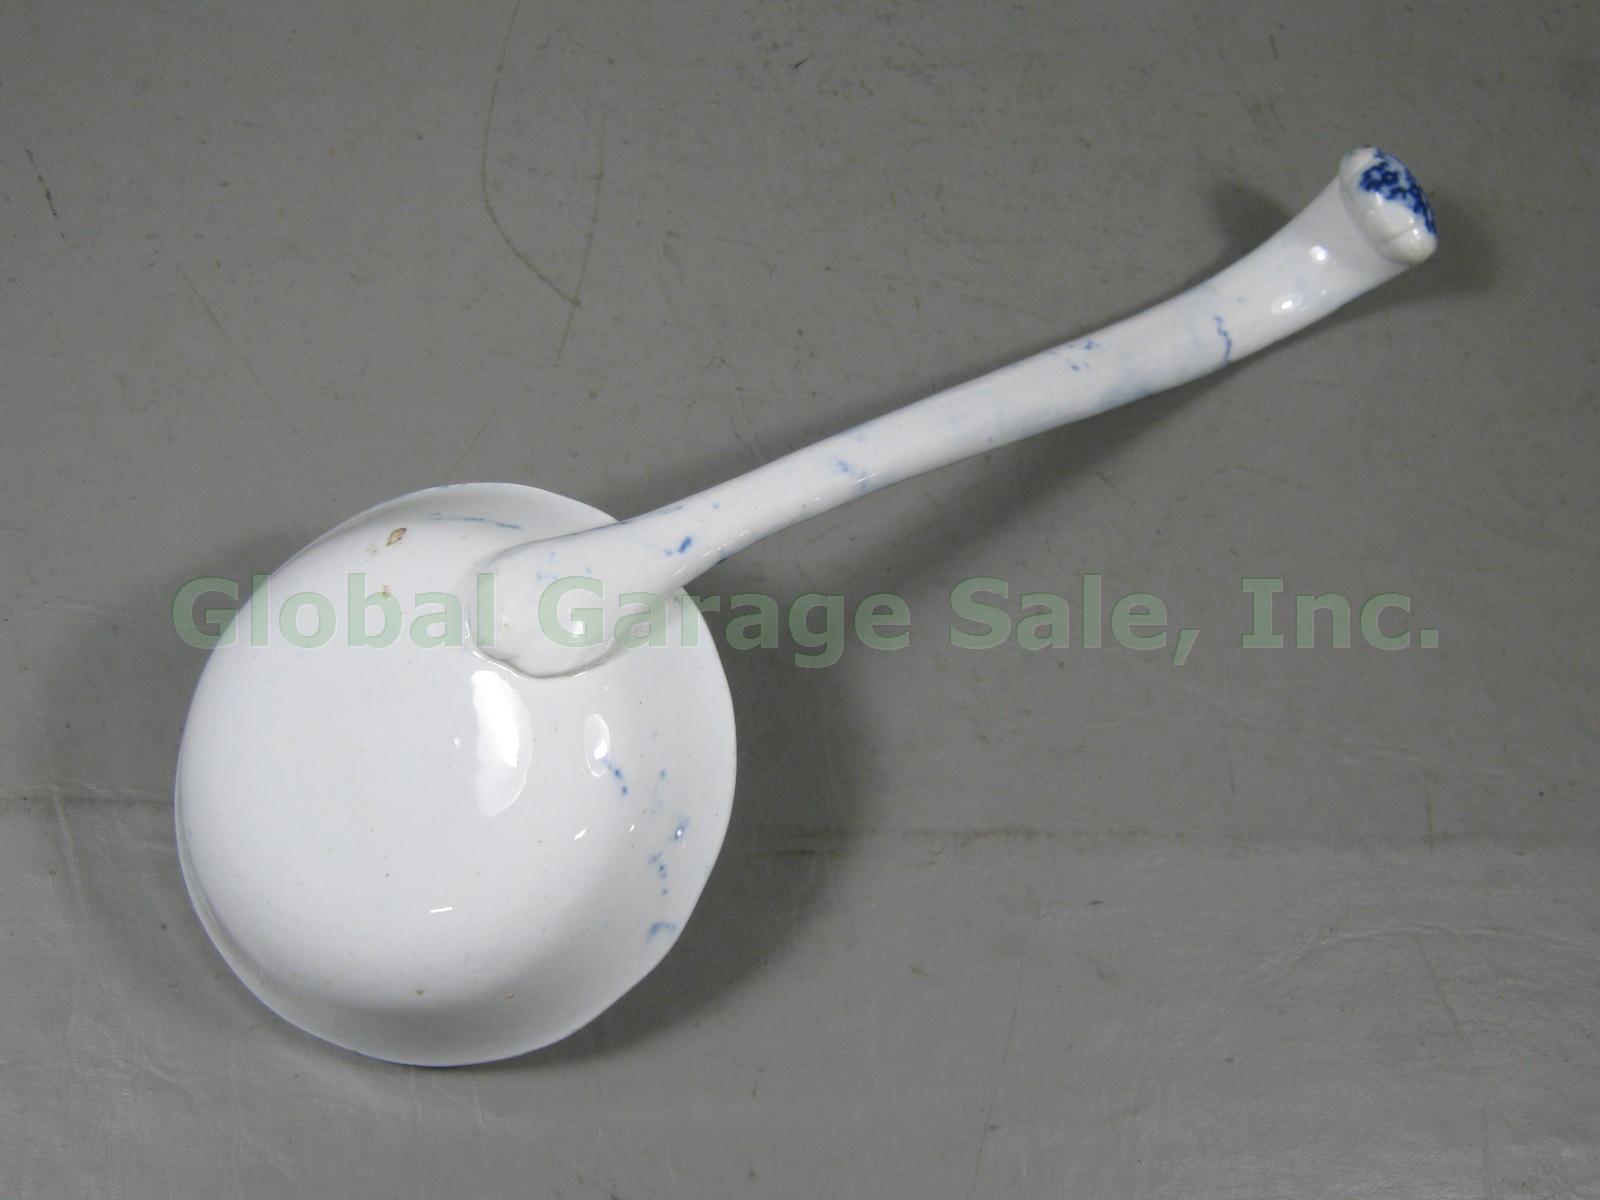 Antique Wedgwood Blue Willow 9" Soup Tureen + Ladle Transferware England EXC! NR 9